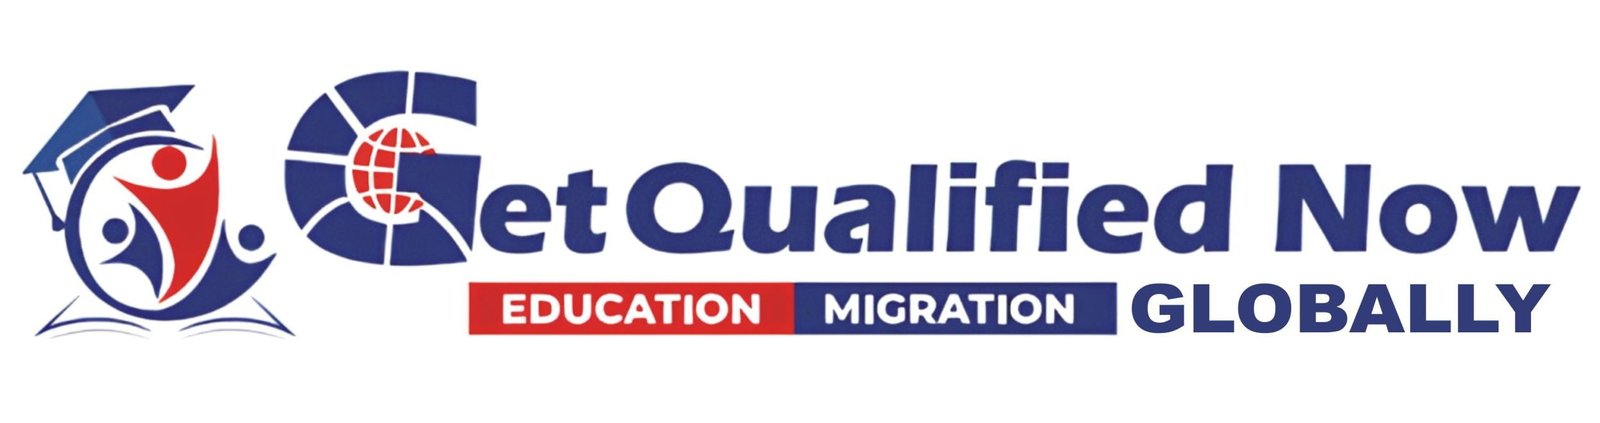 get qualified now- logo